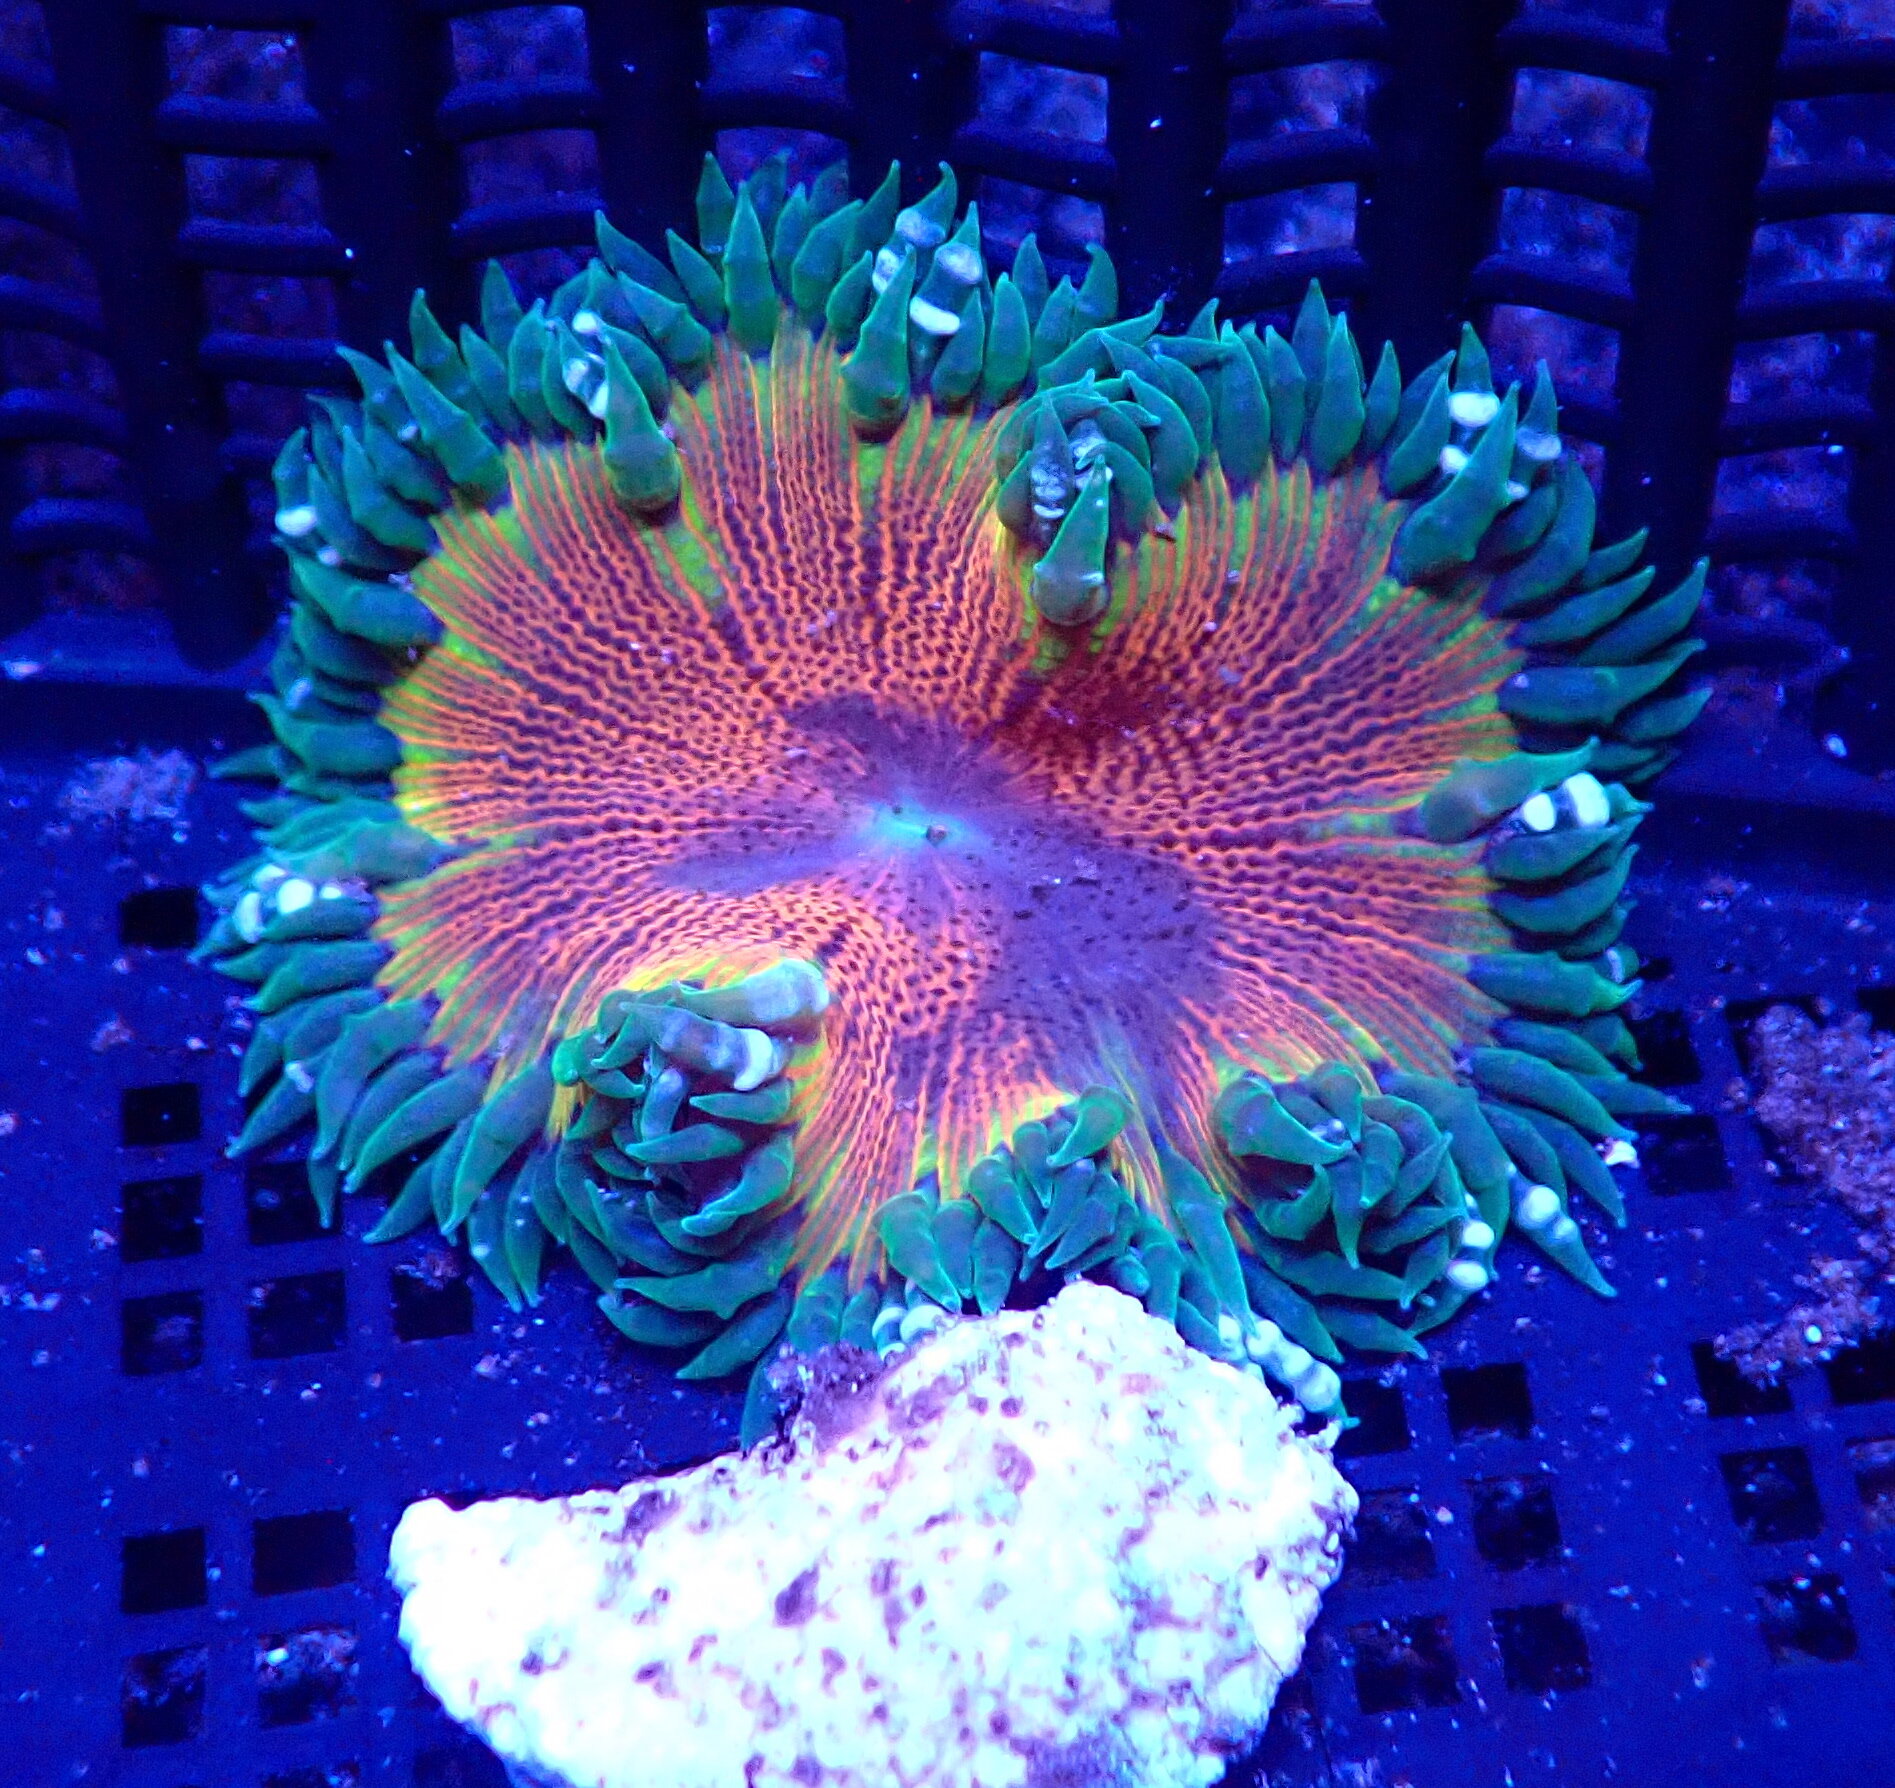 Come check out the biggest selection of rock flower anemones in the Tampa area.  We've got oodles of ultras and 5 packs for $100!

New this week: 
Vargas Cespitularia
Skittles bomb Cyphastrea
Bizarro Cyphastrea
3 types of Gorgonian
Gold cloves
Sympod